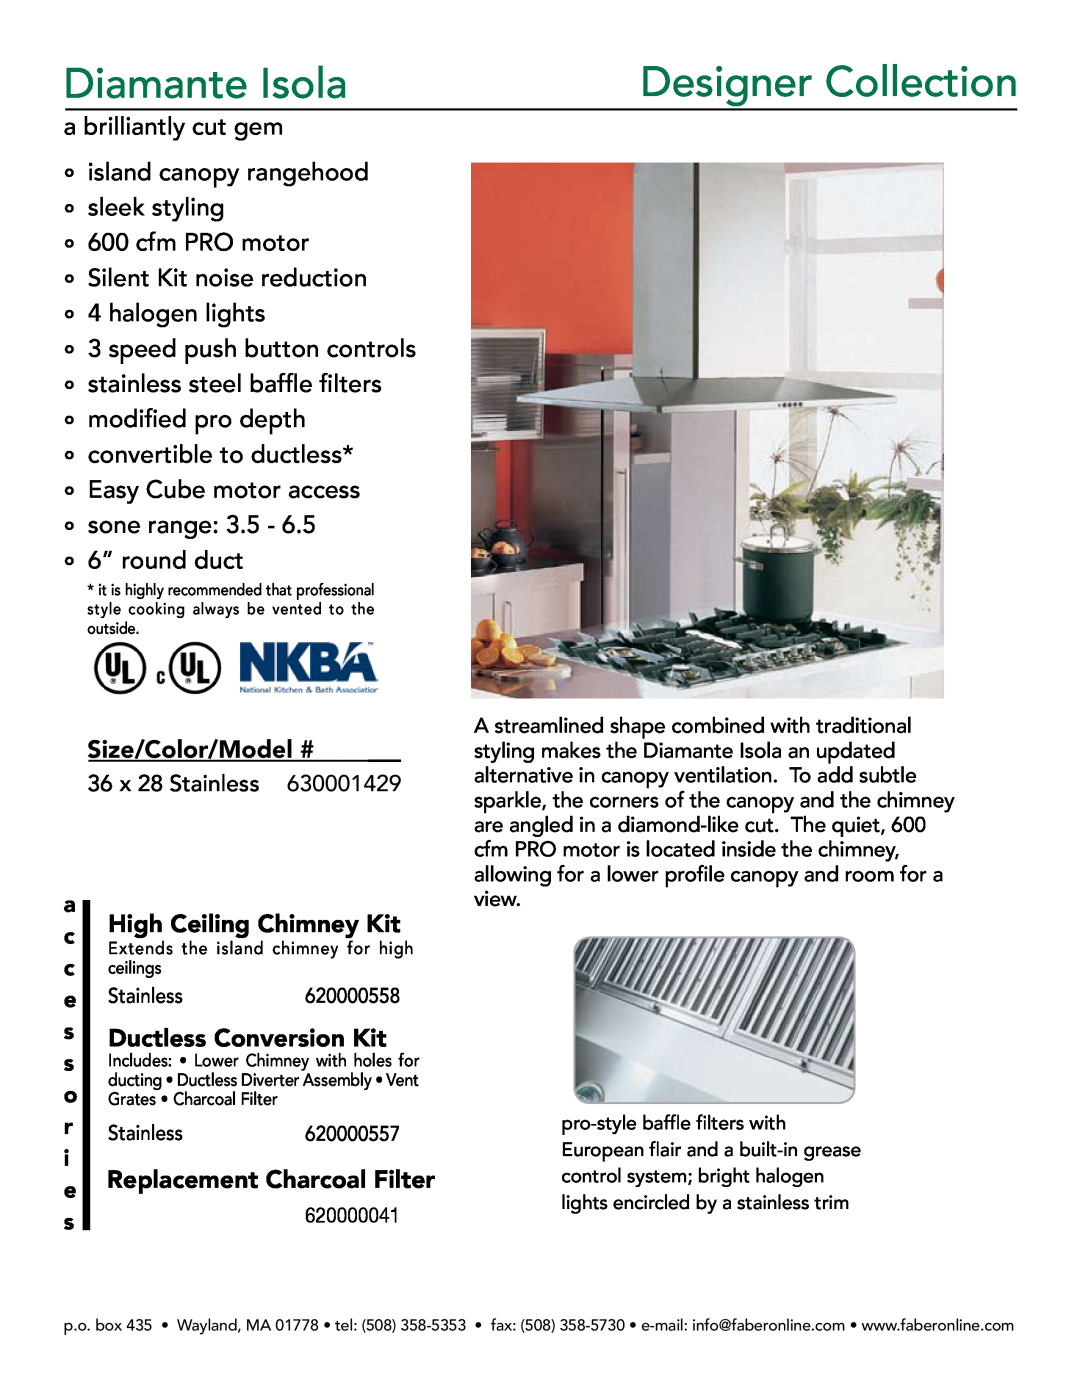 Faber 630001429 manual Size/Color/Model #, High Ceiling Chimney Kit, sDuctless Conversion Kit, Stainless, 620000557 